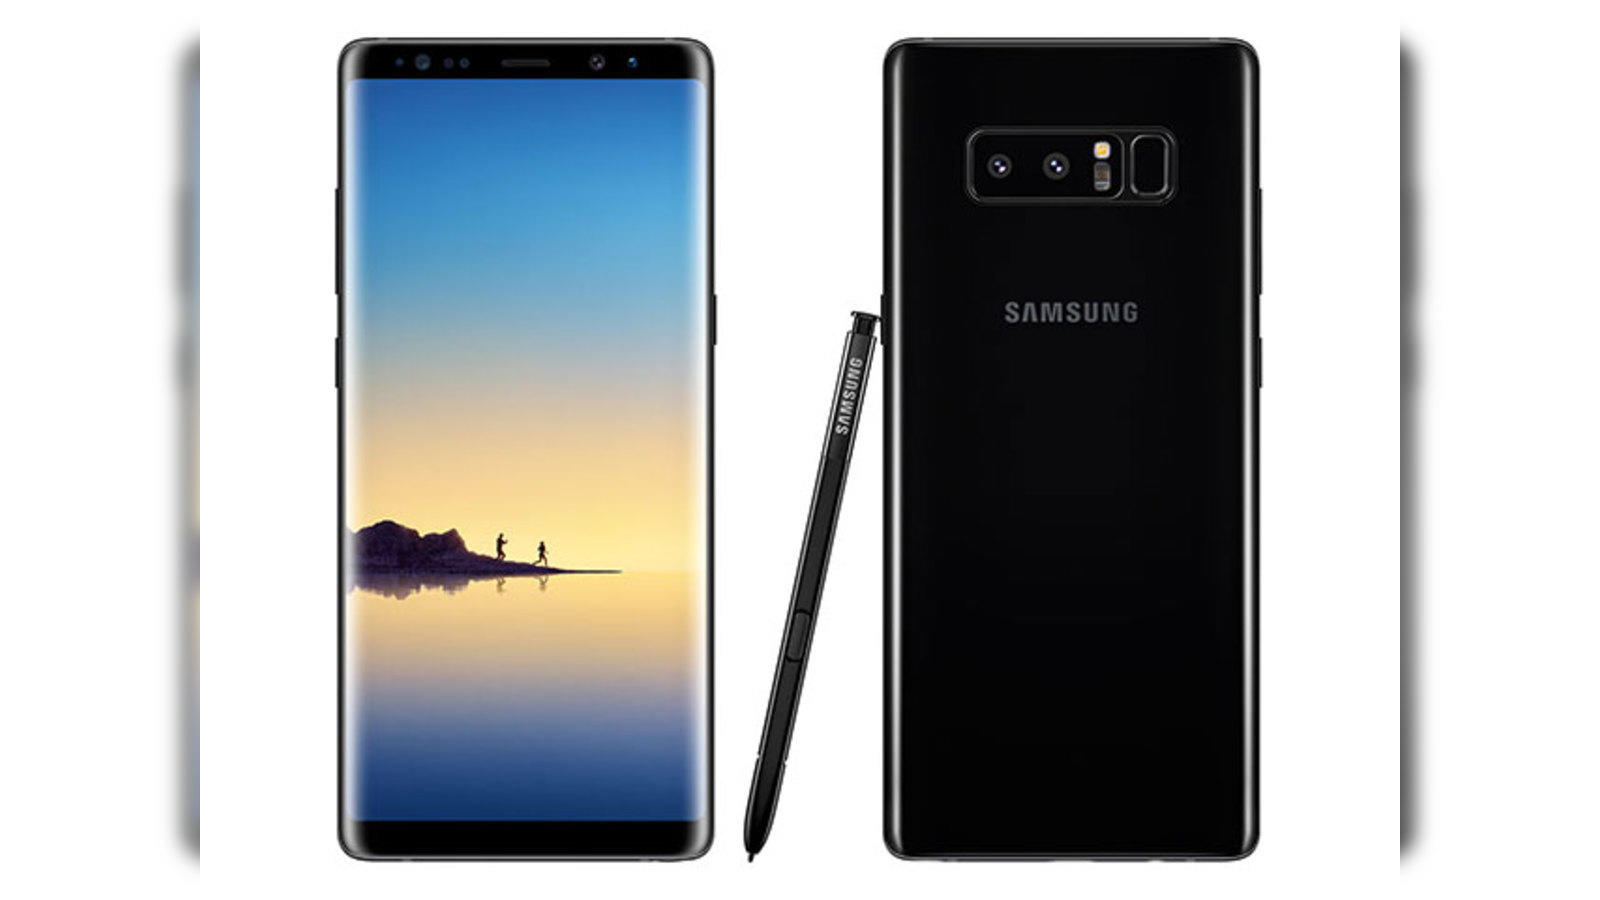 Galaxy Note 8 Price & Specs: Samsung Galaxy Note 8 launched in India at Rs  67,900